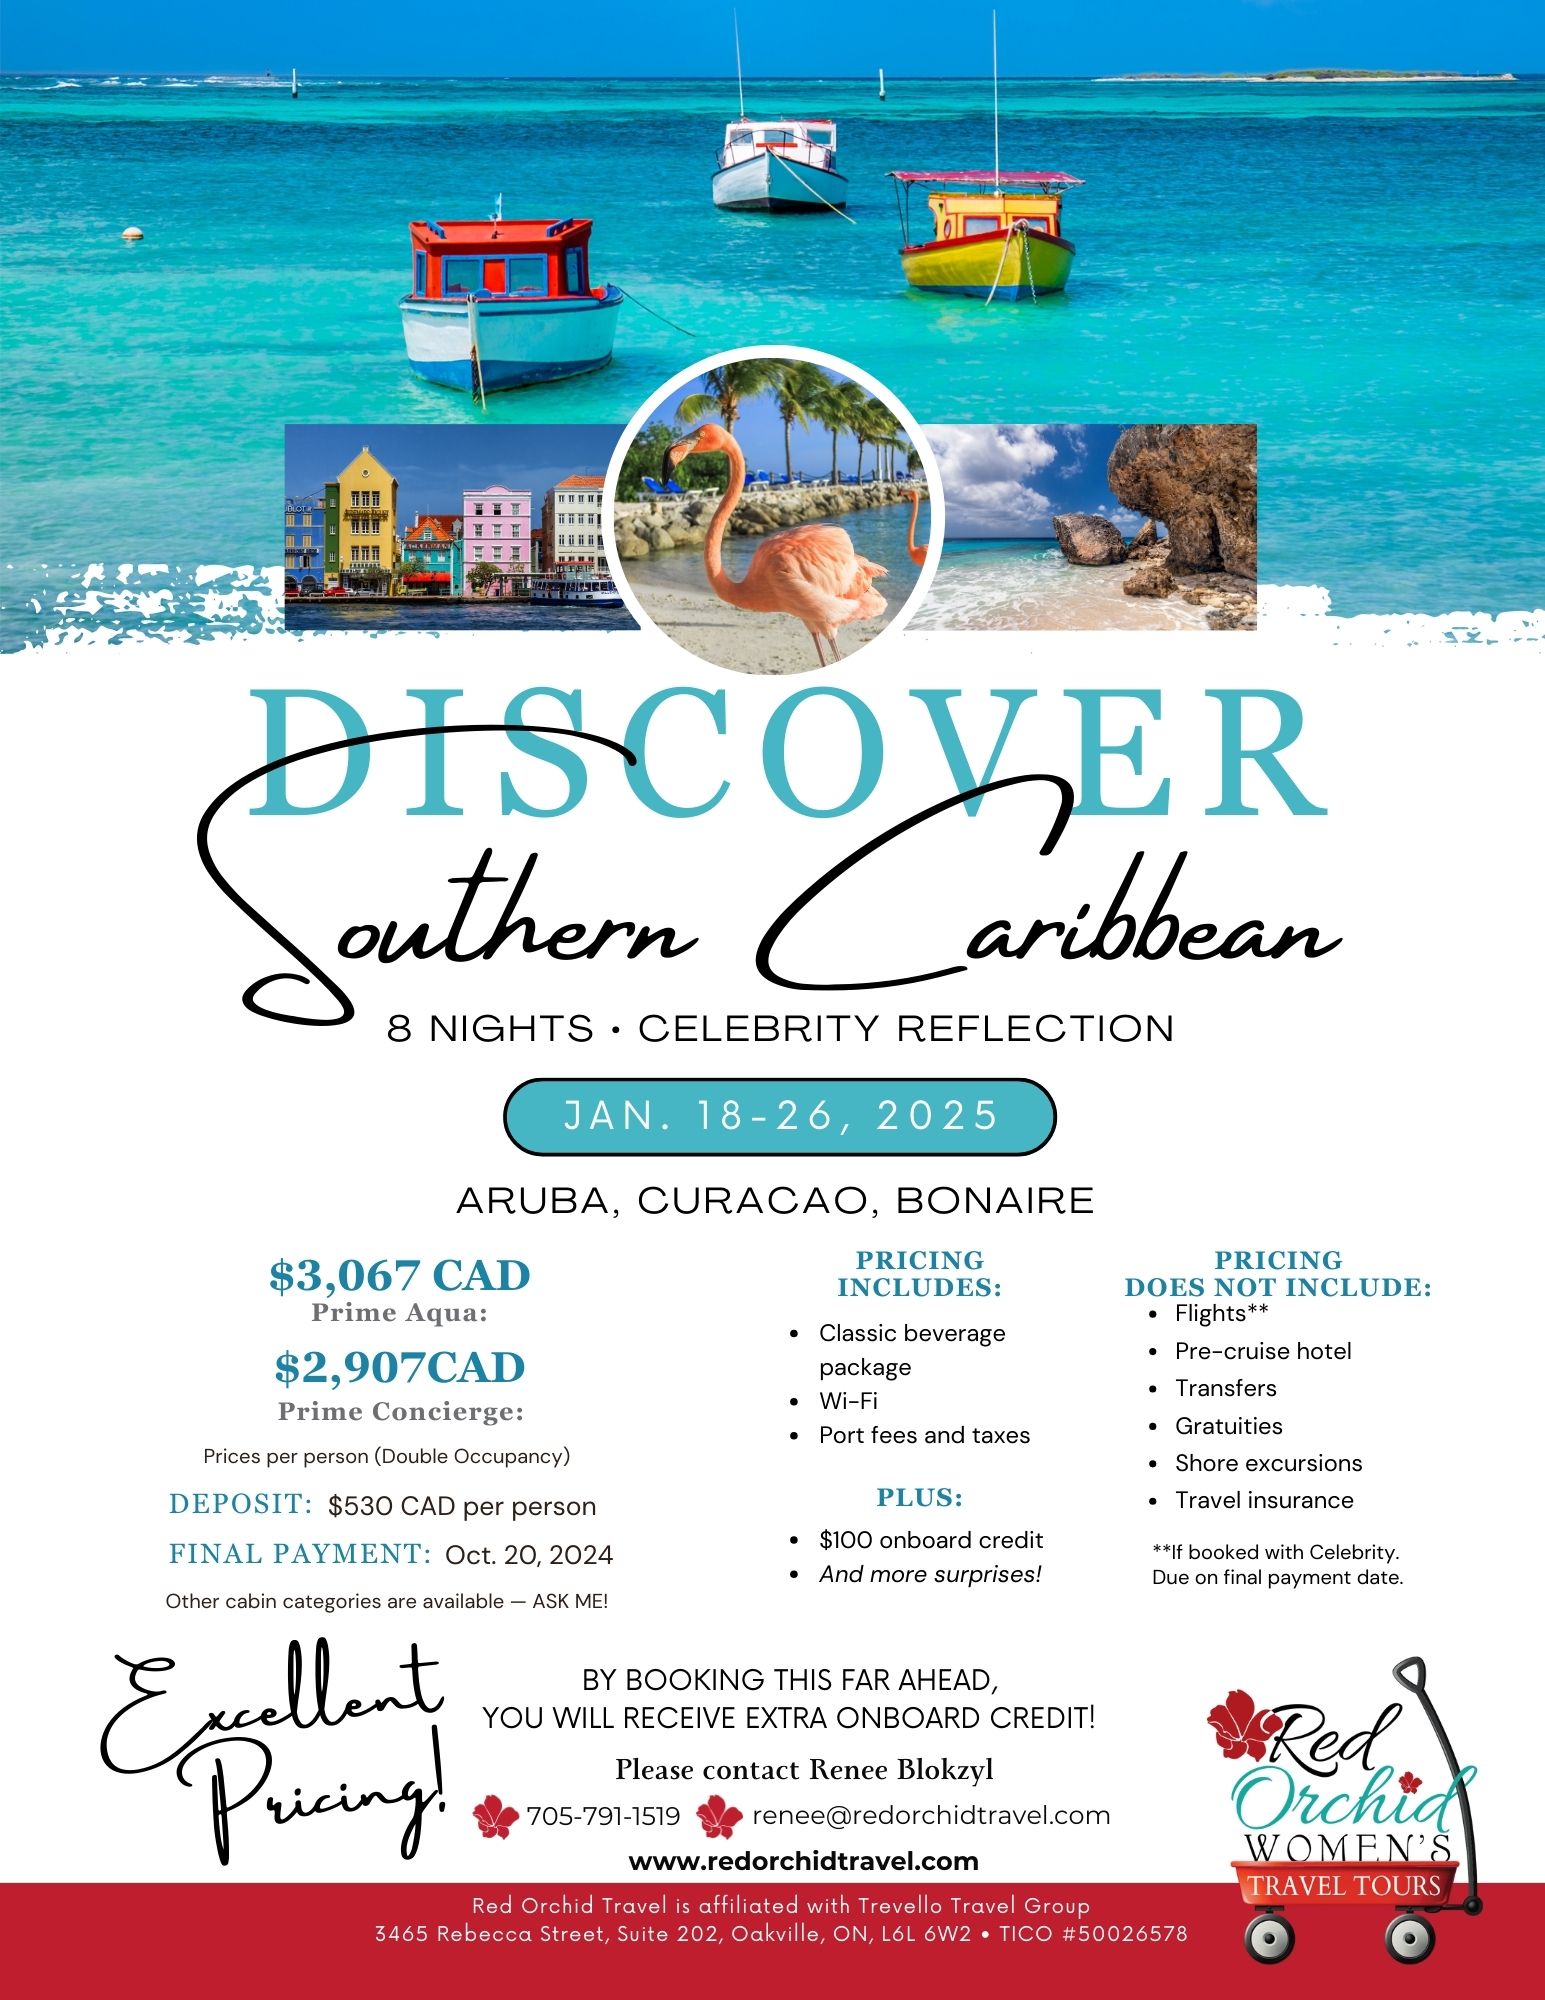 Join Red Orchid Women’s Travel Tours on this 8 night Celebrity cruise! Aruba, Curacao and Bonaire are amazing places to explore!